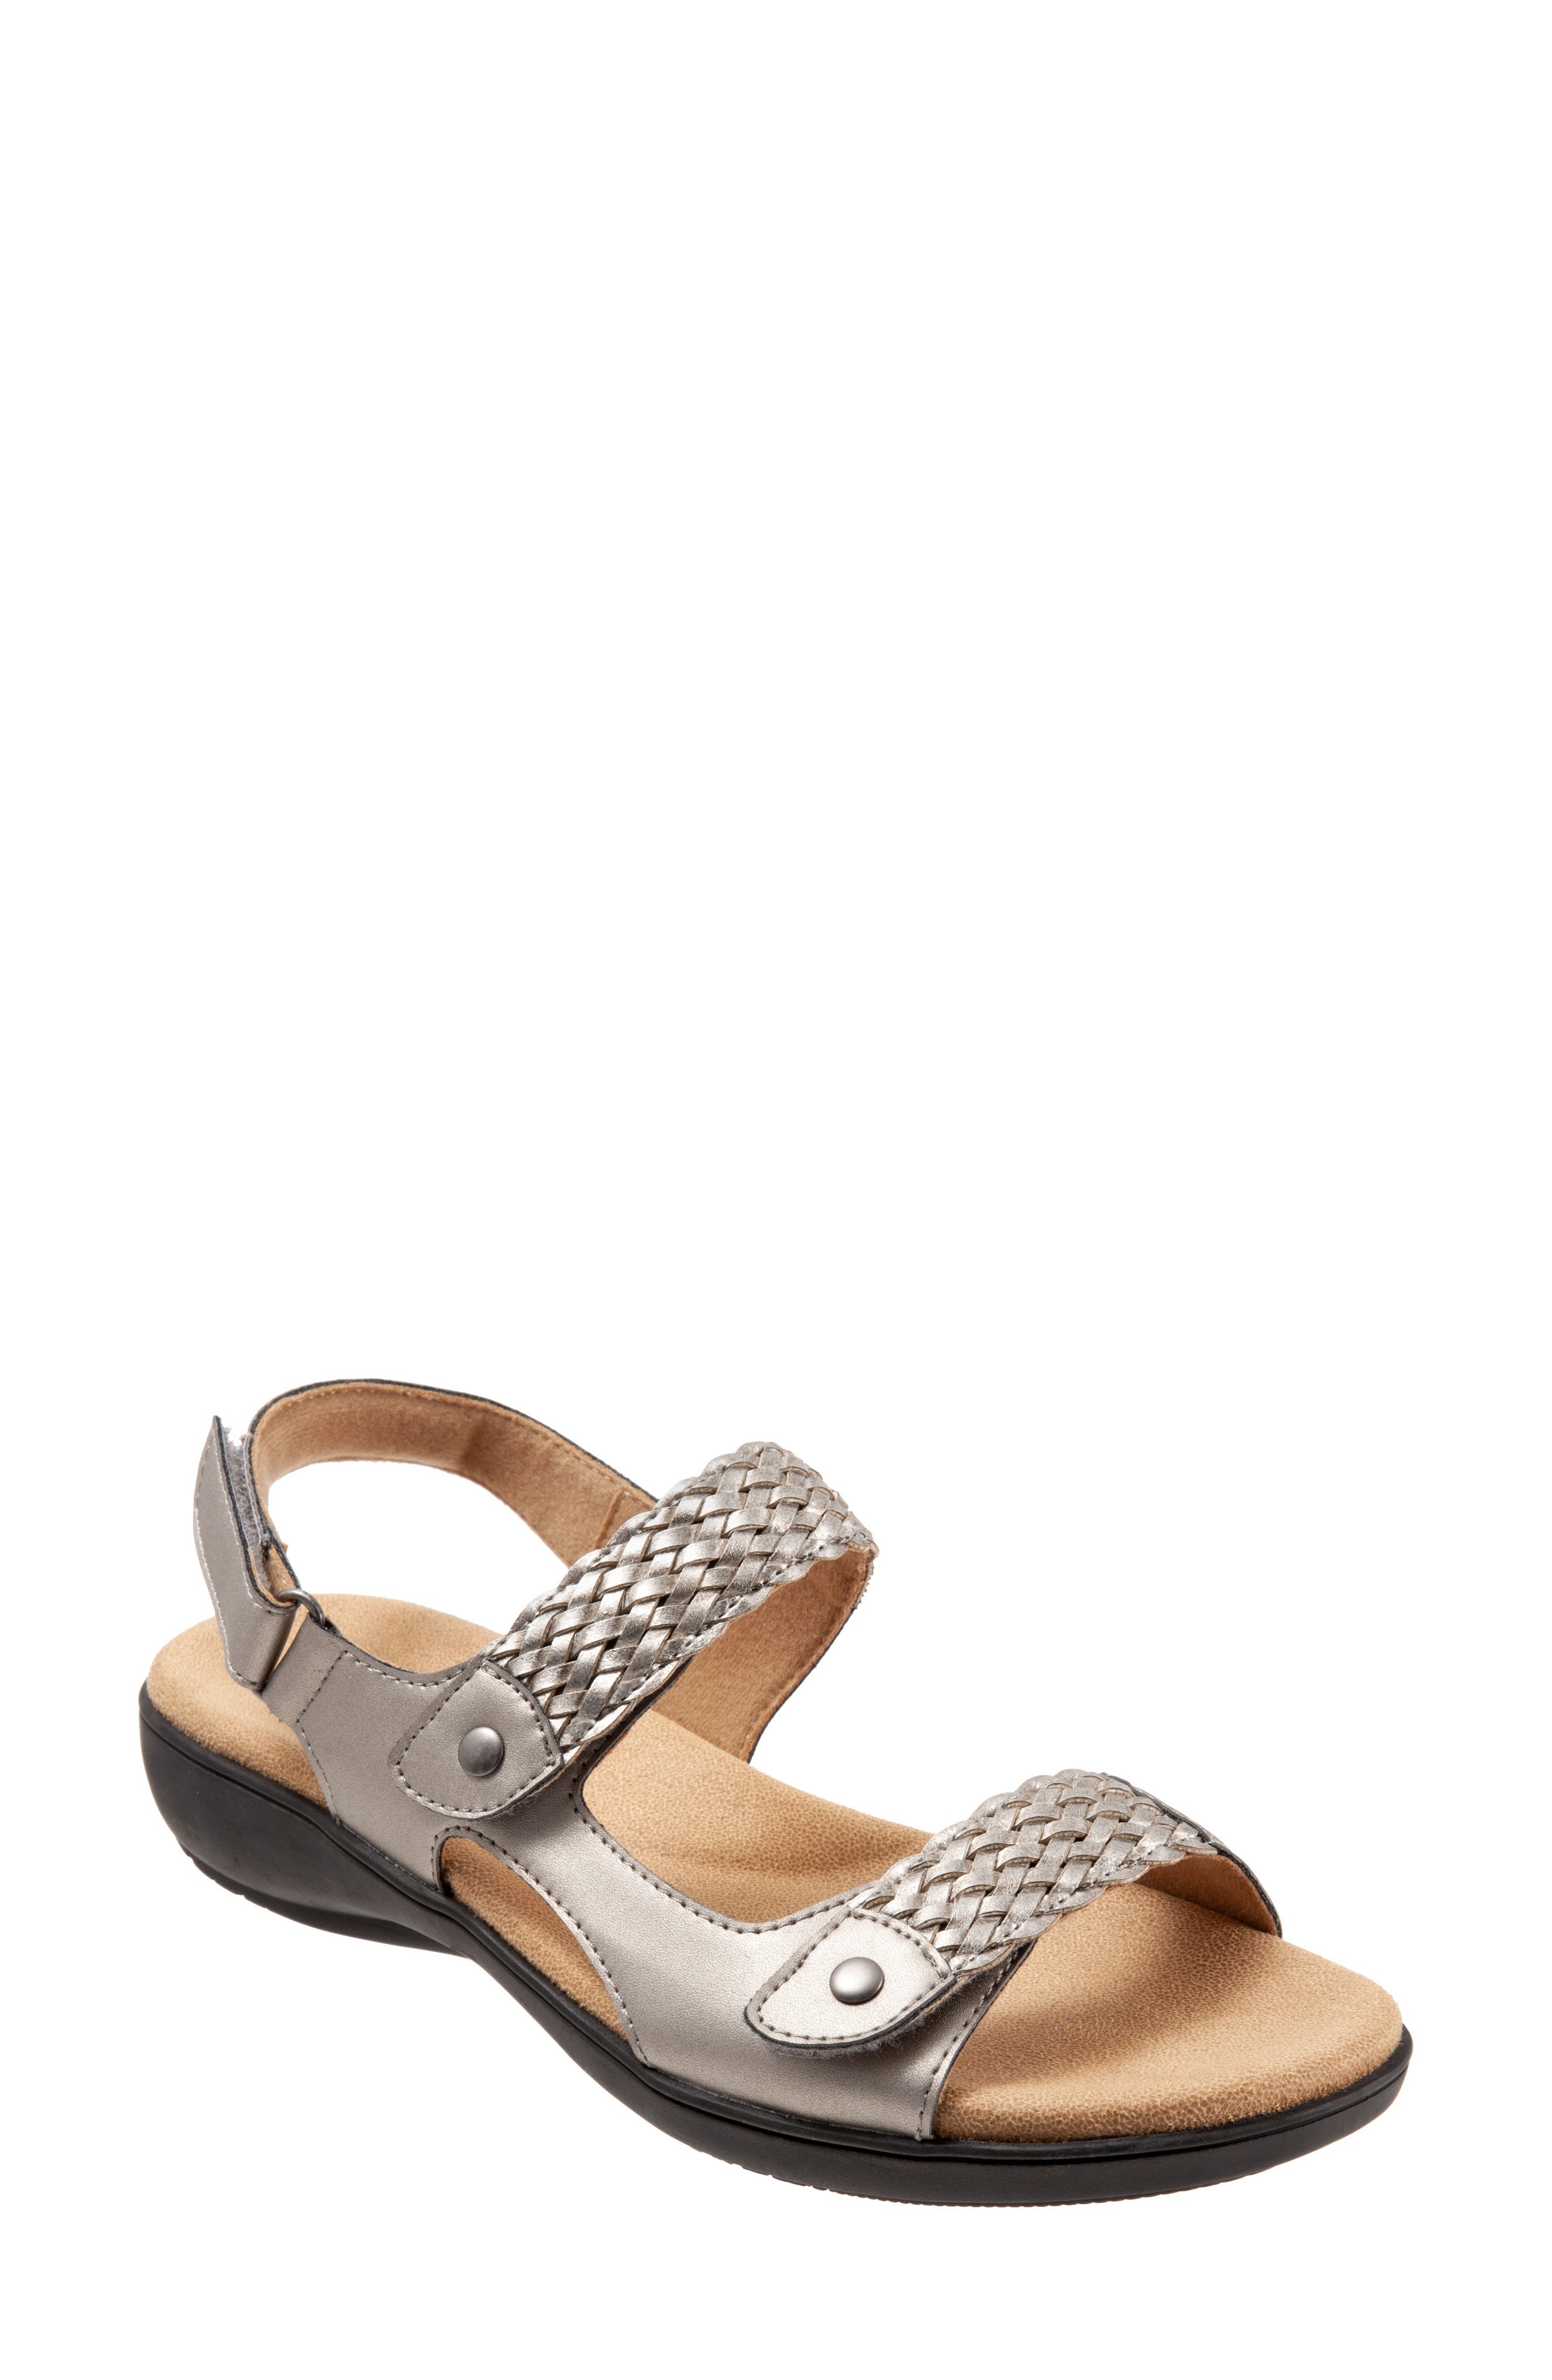 Trotters Shoes Sale \u0026 Clearance | Nordstrom